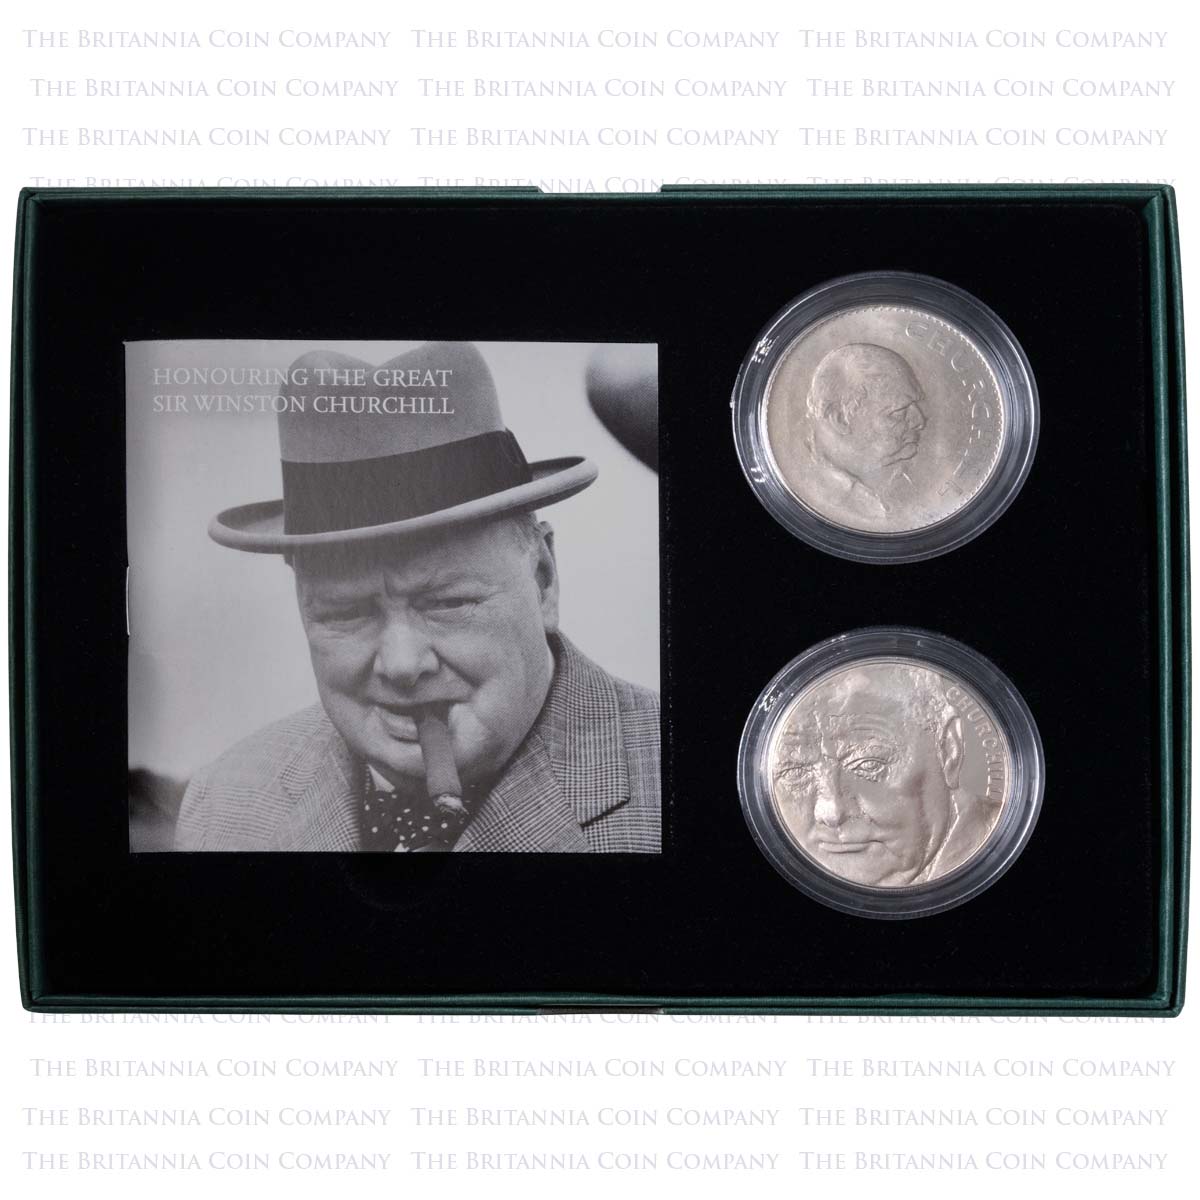 UK15WC2S 2015 Sir Winston Churchill Death 50th Anniversary Five Pound Crown Two Coin Brilliant Uncirculated Set